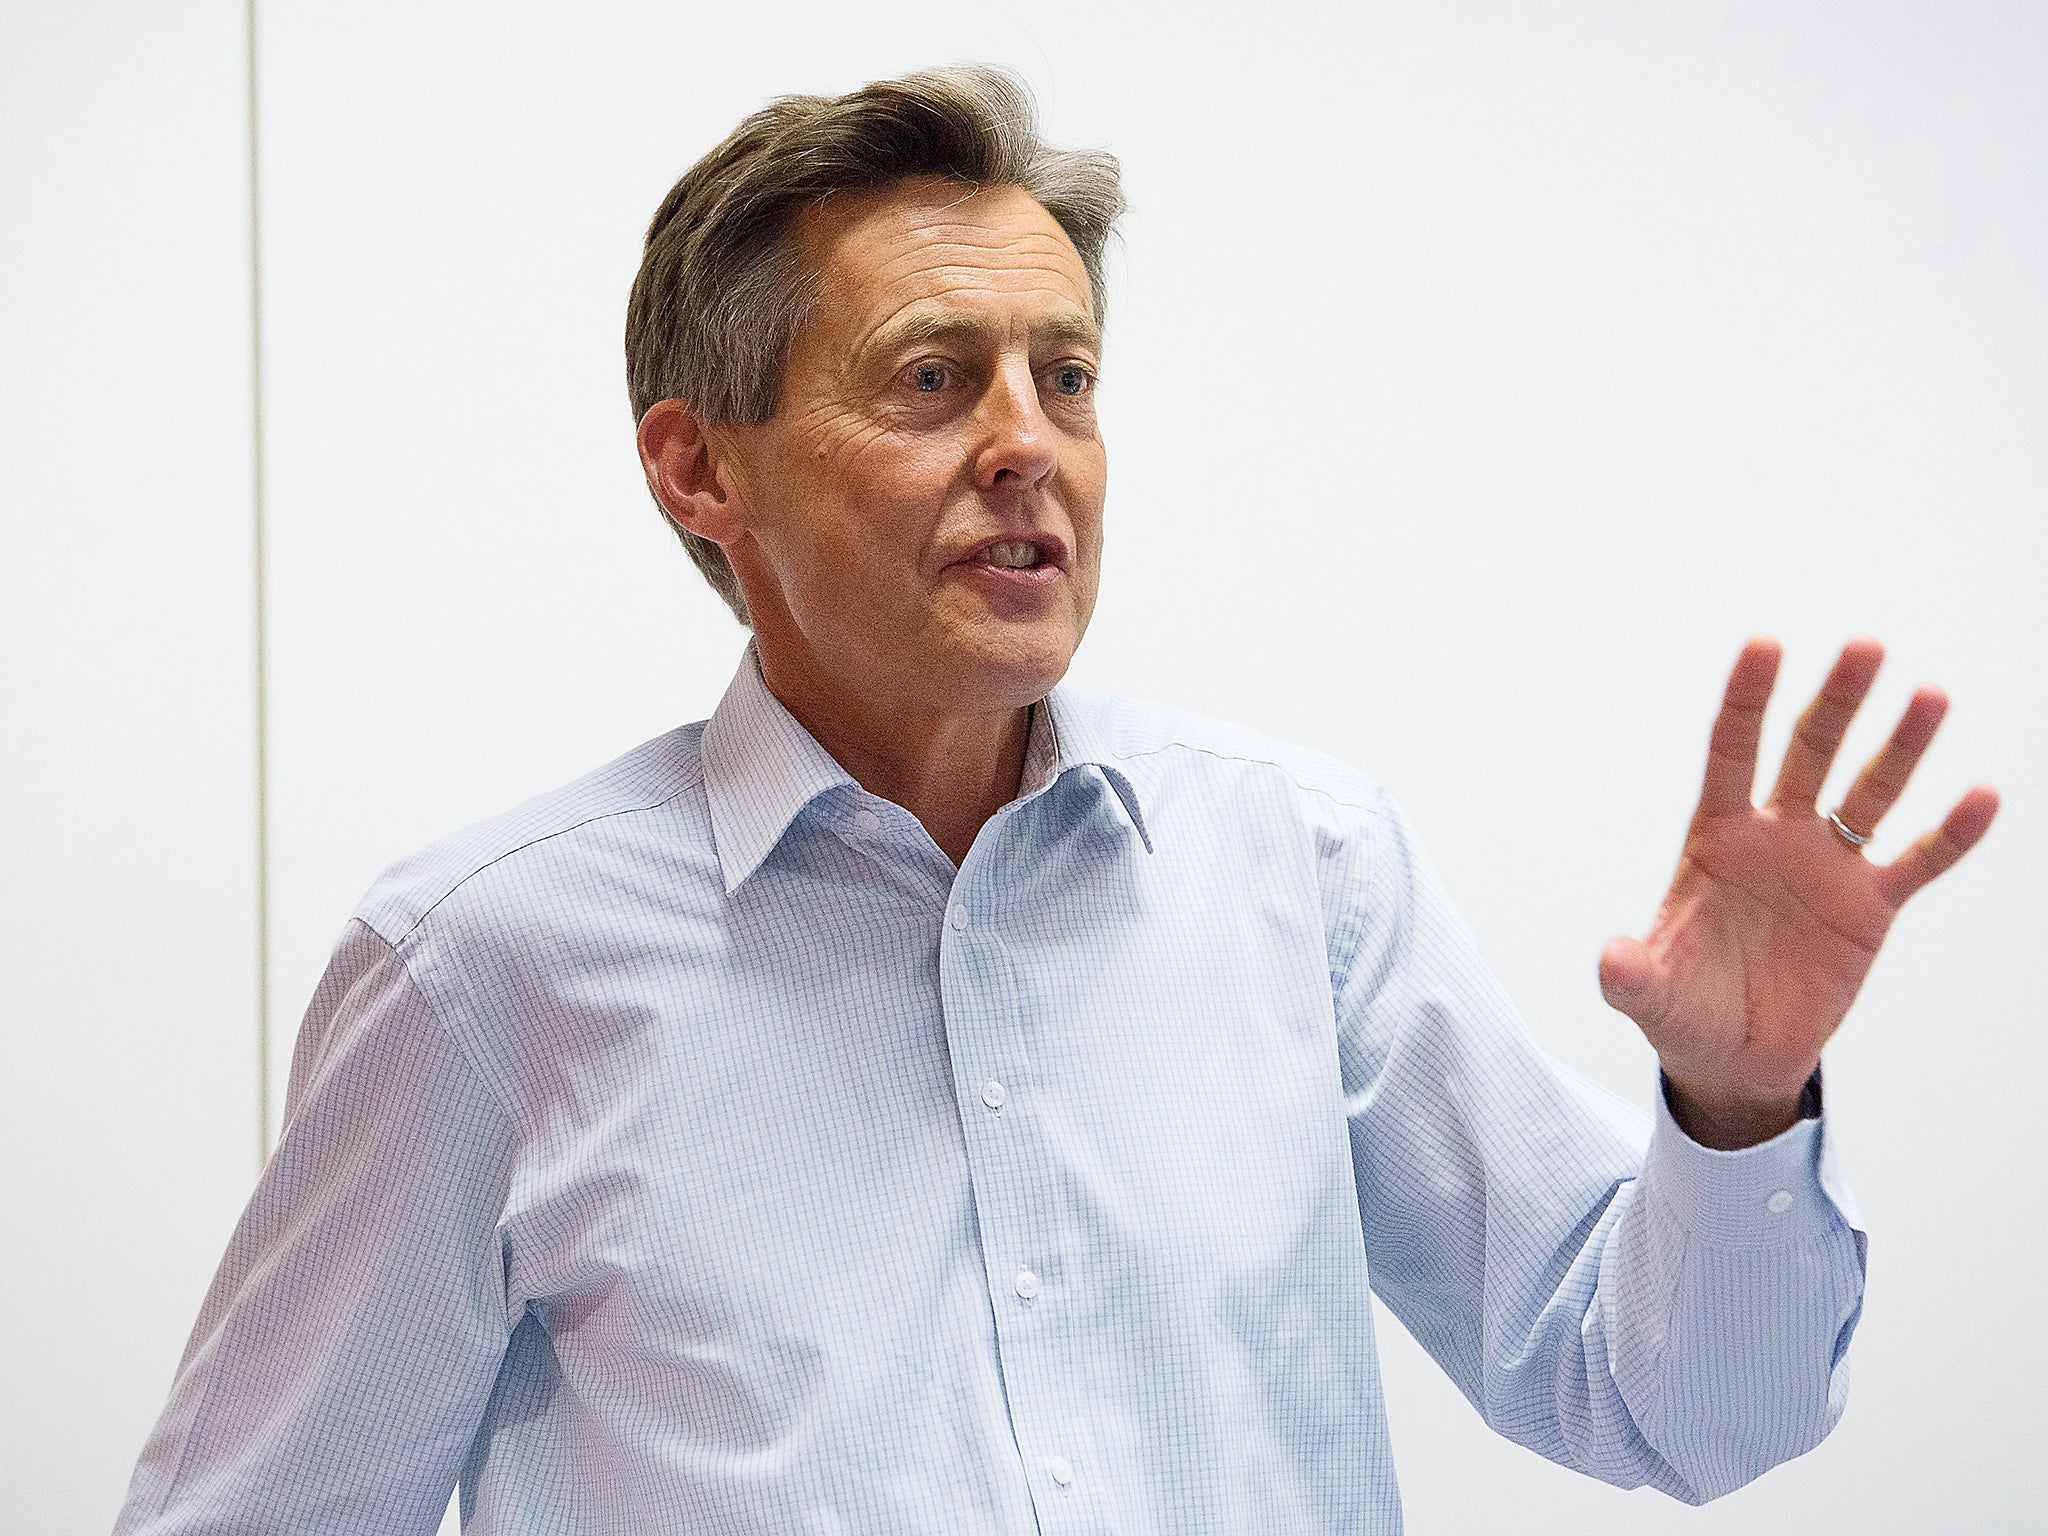 Ben Bradshaw said Labour ought to be 20 points ahead of an ‘evidently beatable’ Tory party